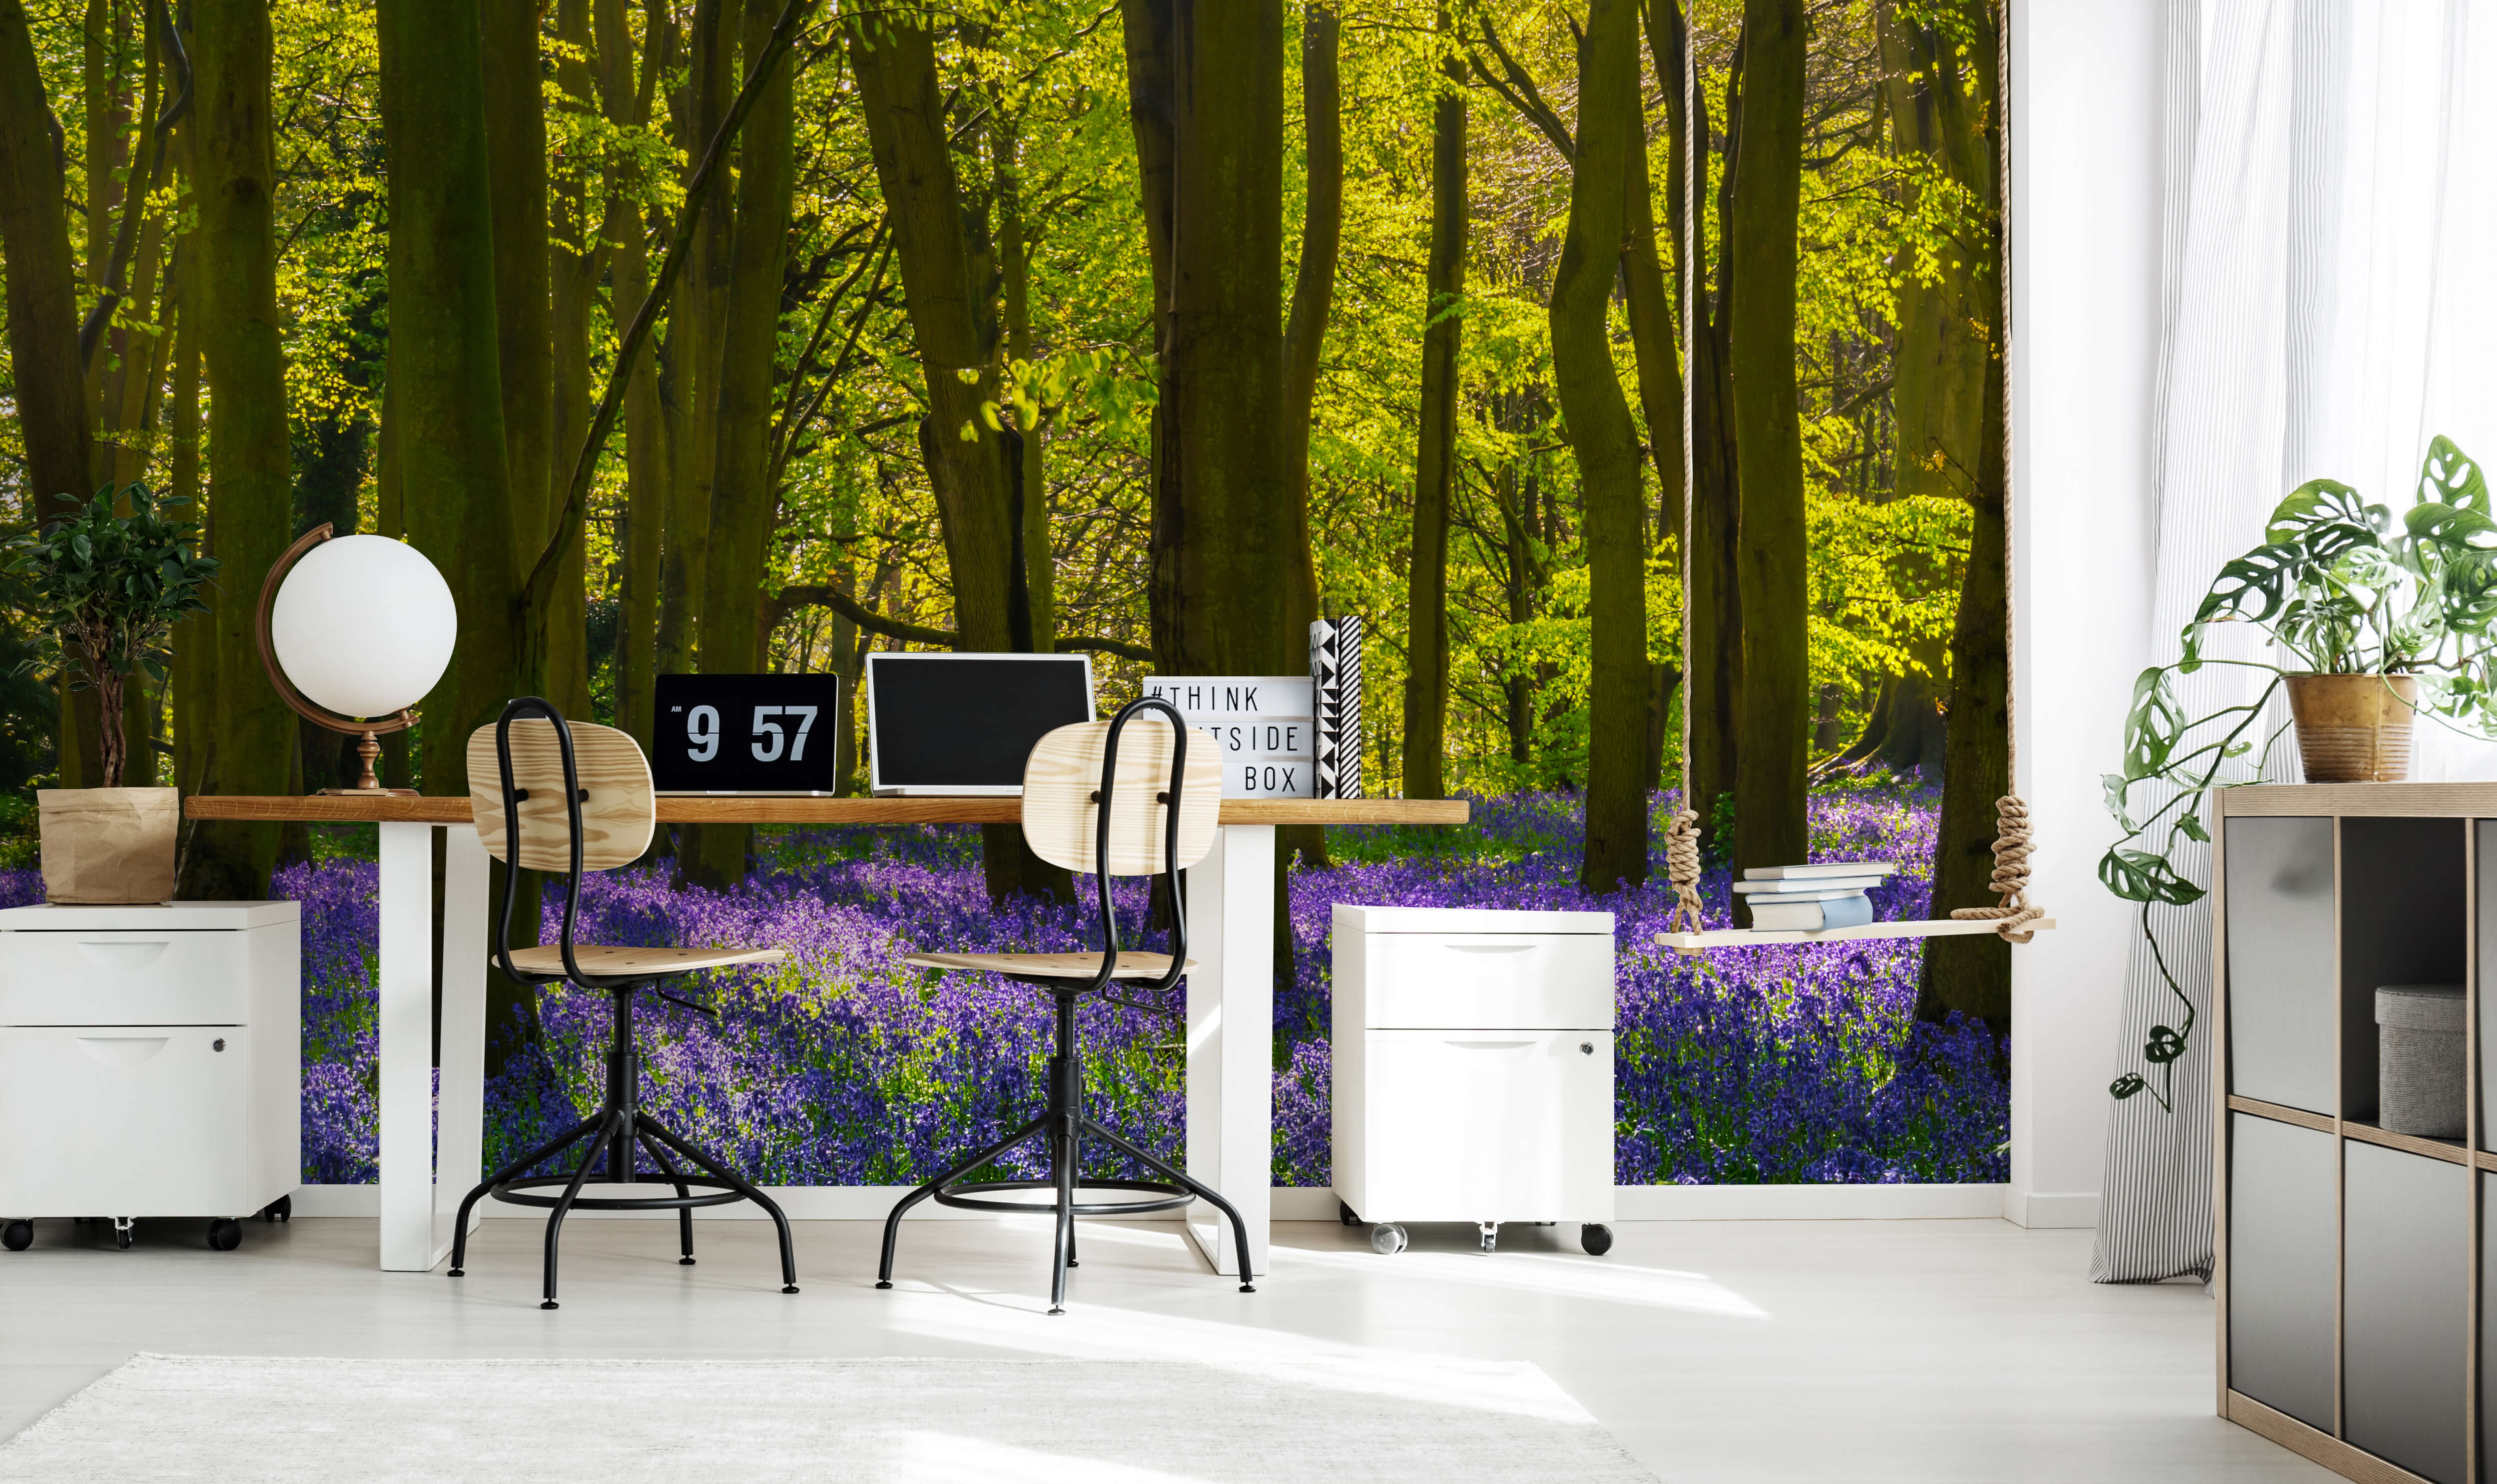 Spring wallpaper mural in a green woods with bluebell flowers in a living room with a grey sofa